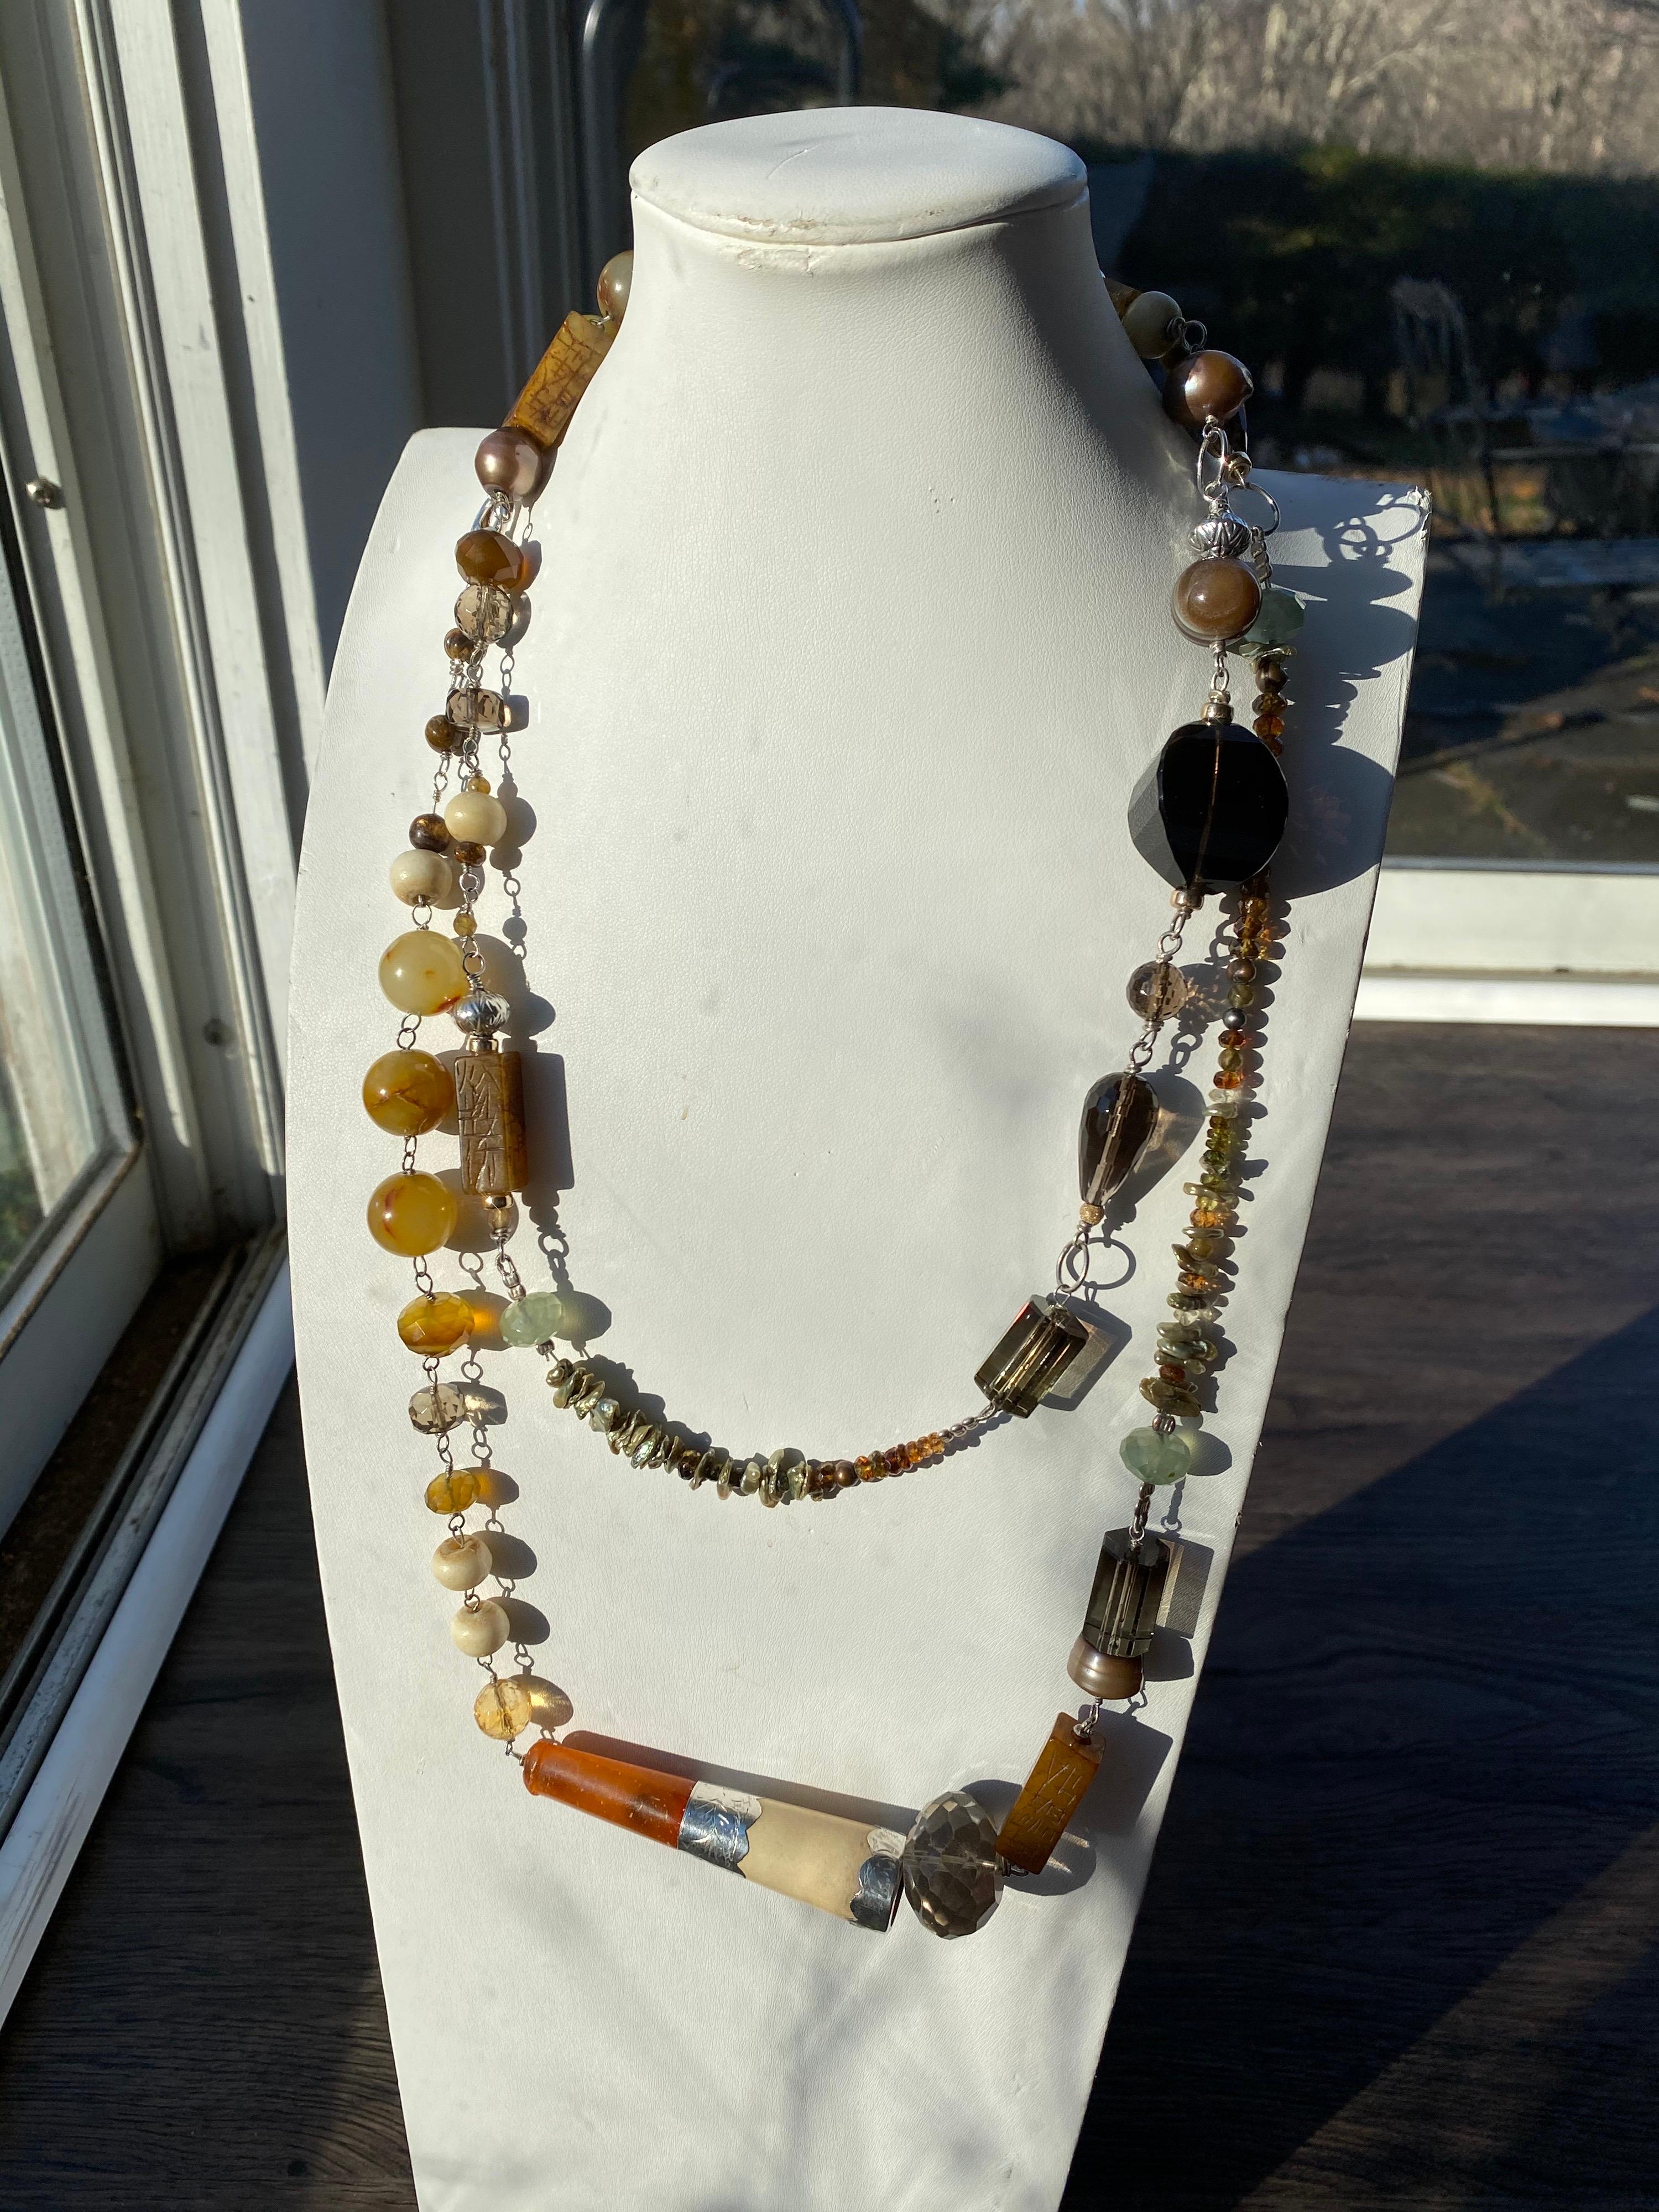 From the Jane Magon Collections, Australian Landscape comes this one of a kind dramatic long necklace with an impressive array of gemstones. Citrines, monkey Quartz, Jades, Jaspers, Chalcedony, Dyed Keshi Pearls, Brown Freshwater Pearls, Carved tiny